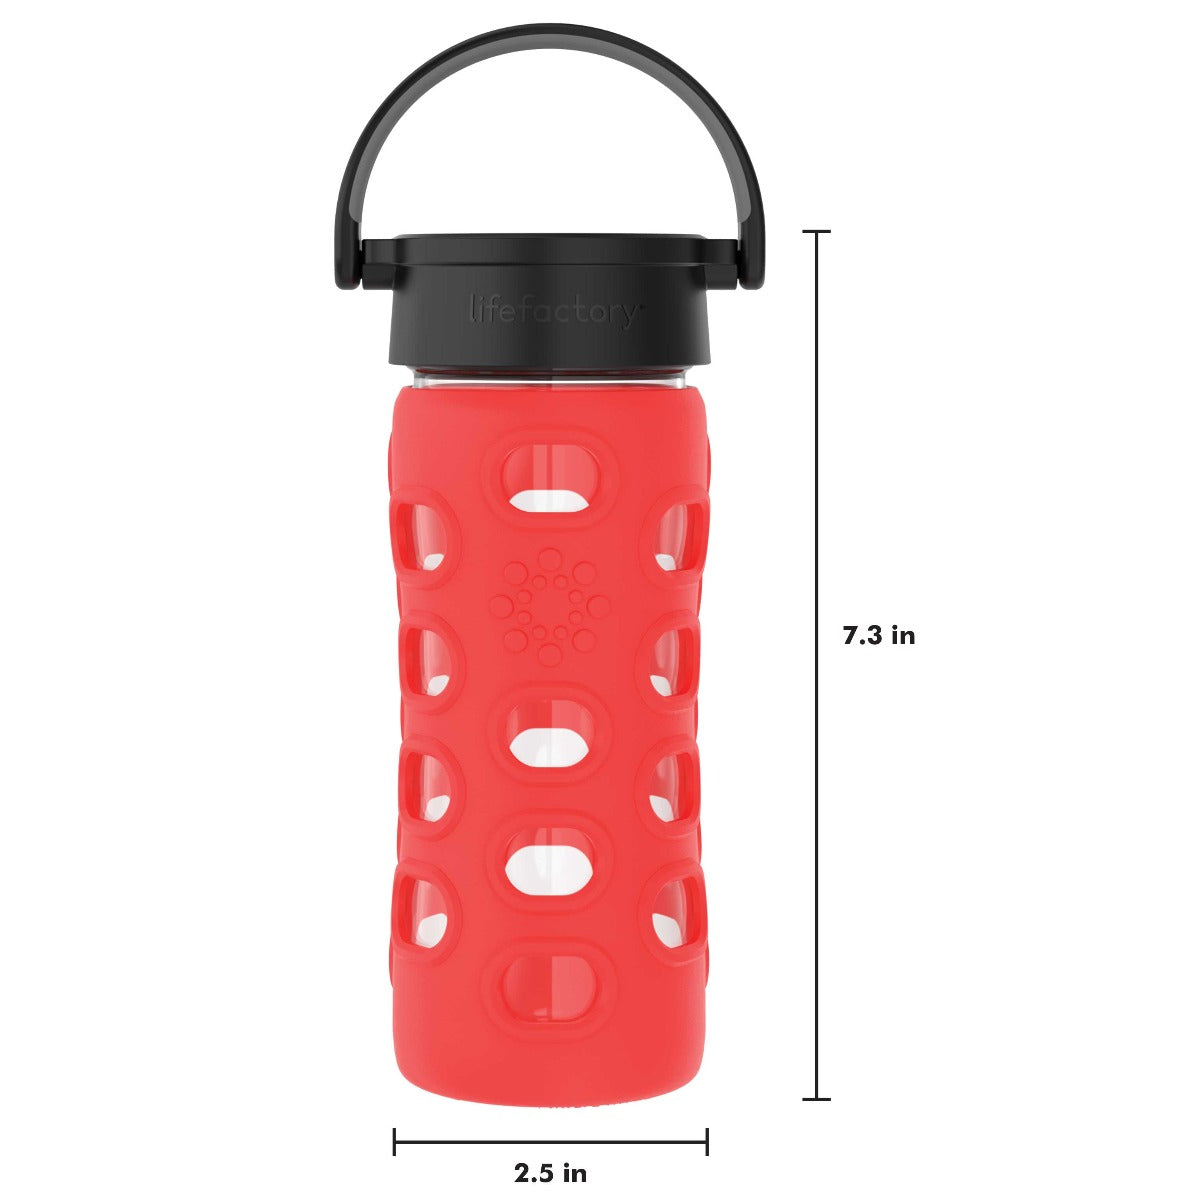 Lifefactory 12 oz Glass Water Bottle with Classic Cap and Silicone Sleeve - Apple Red